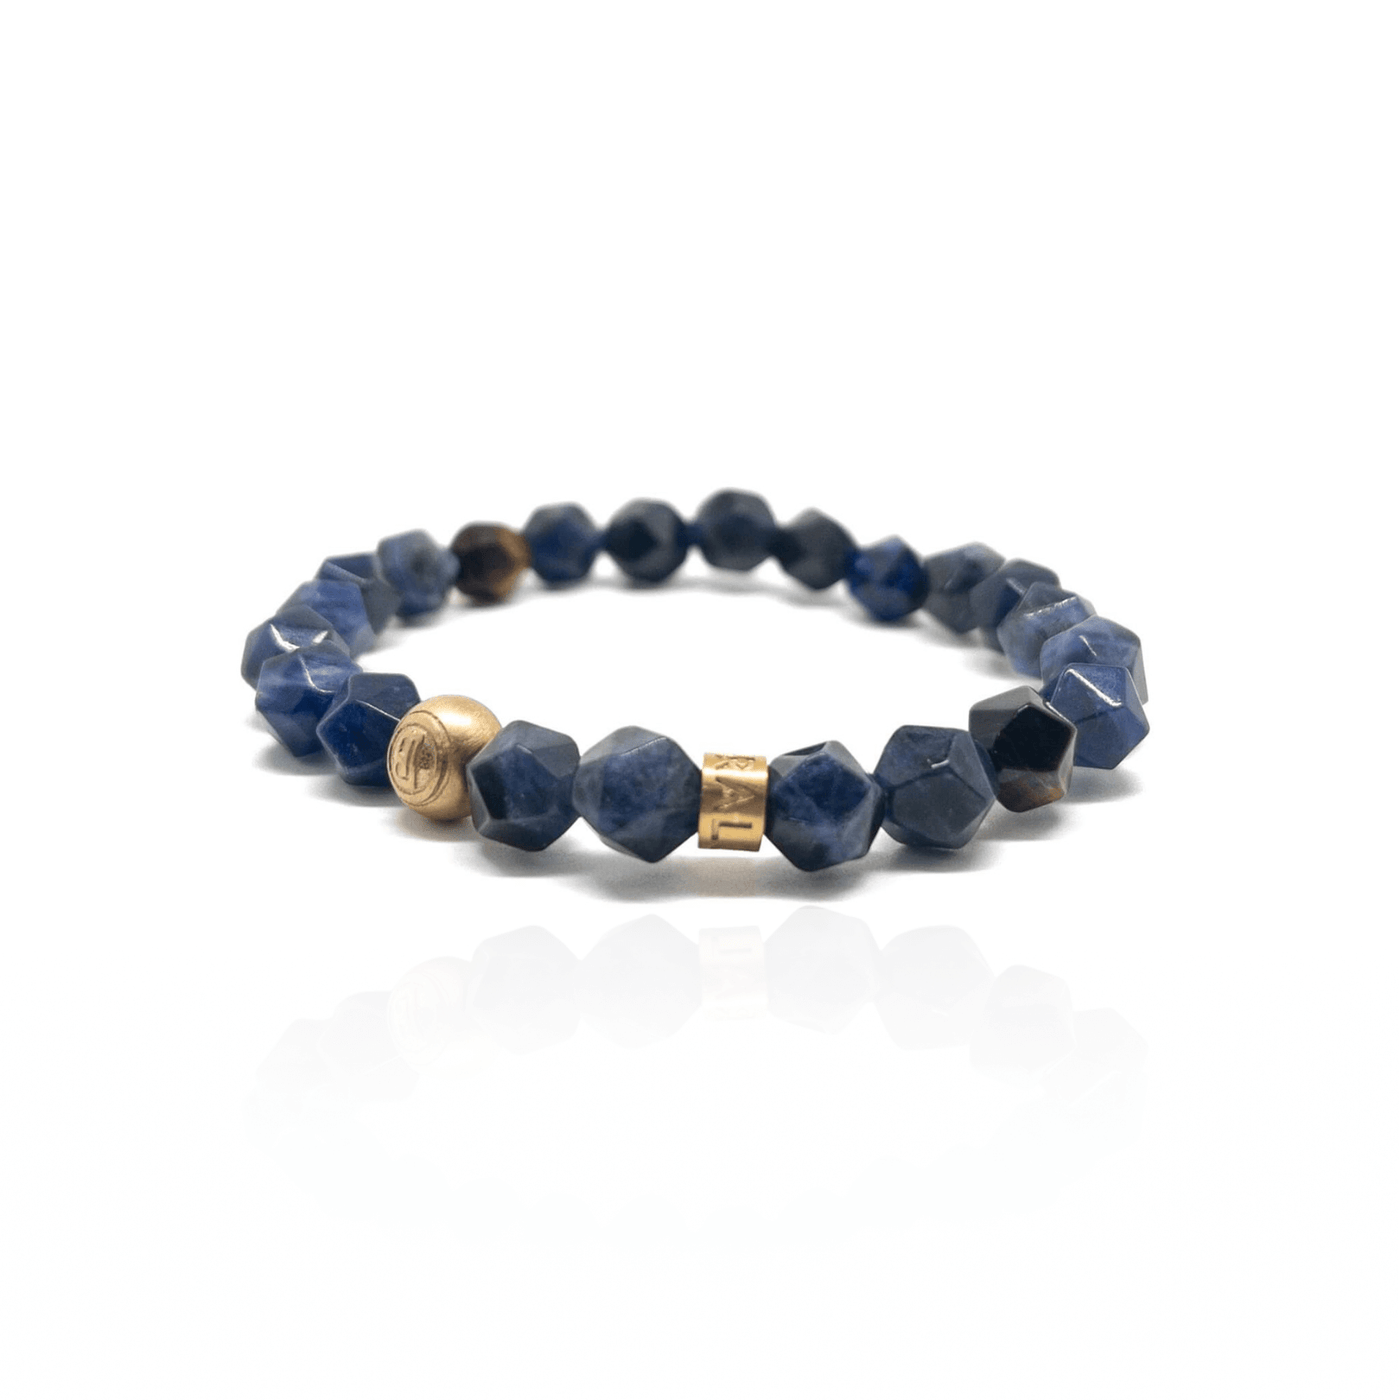 The Faceted Blue Sodalite and Brown Tiger eye Signed Gold Plated Bracelet